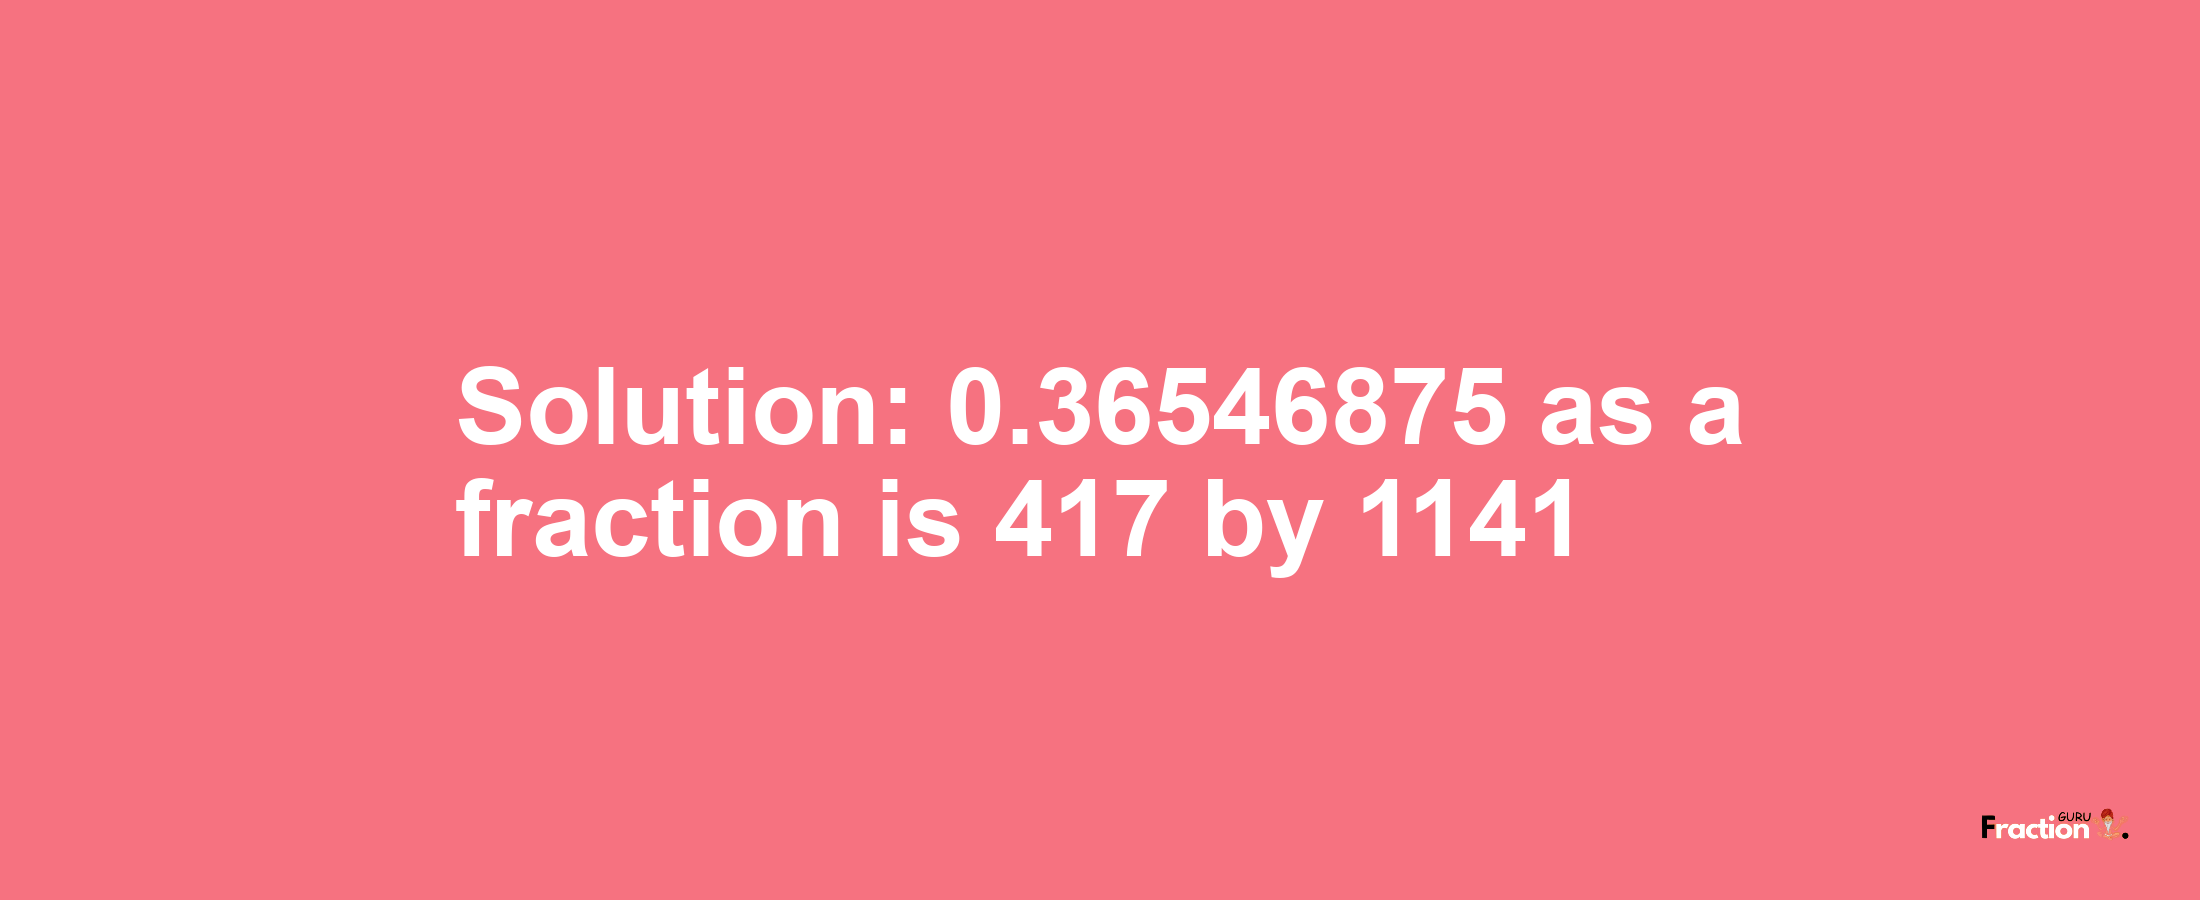 Solution:0.36546875 as a fraction is 417/1141